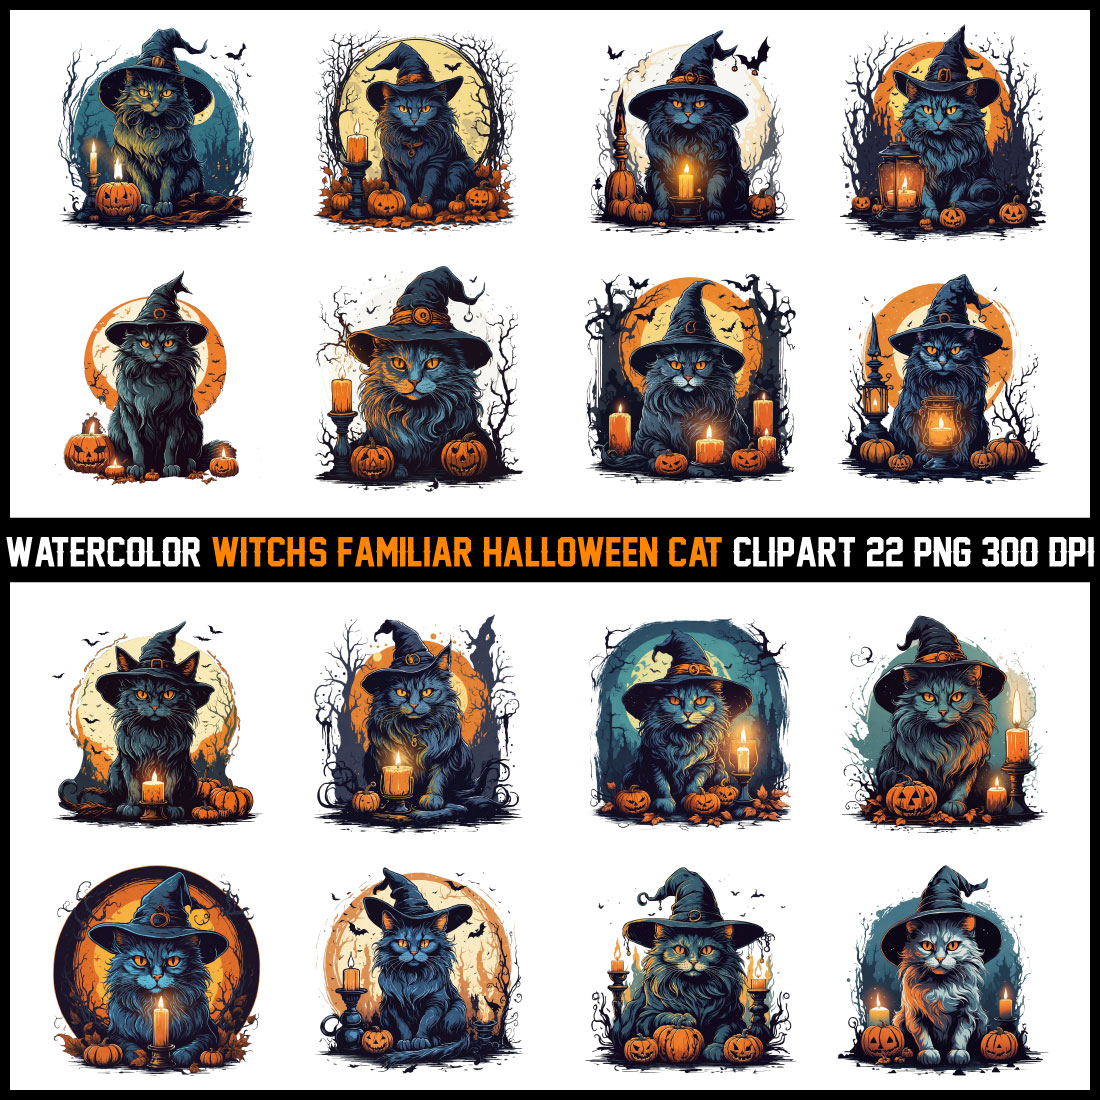 Watercolor Witch's Familiar Halloween Cat Clipart cover image.